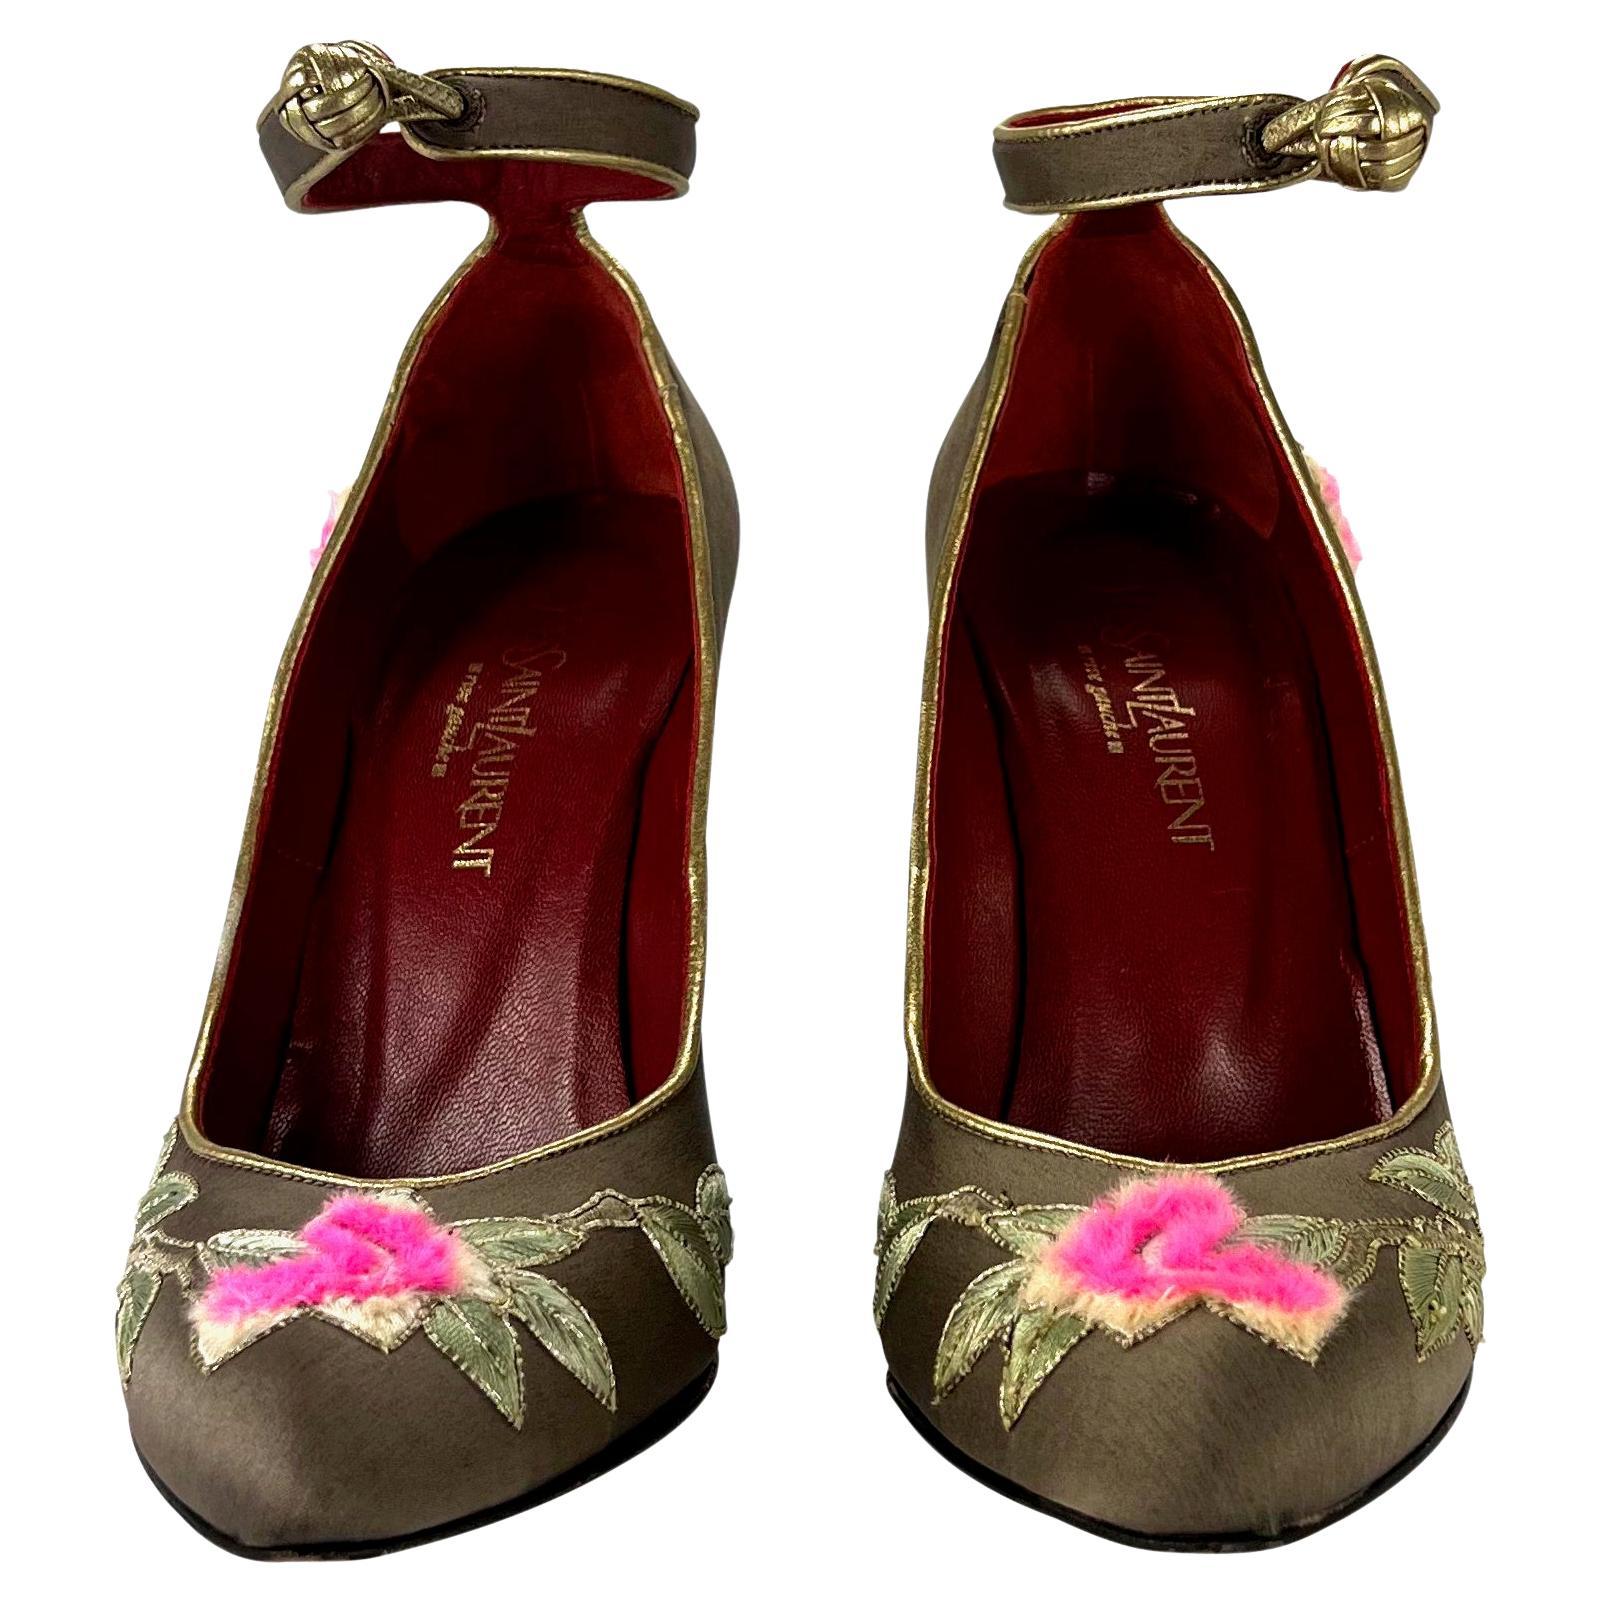 F/W 2004 Yves Saint Laurent by Tom Ford - Chaussures compensées brodées Chinoiserie Taille 36 en vente 2